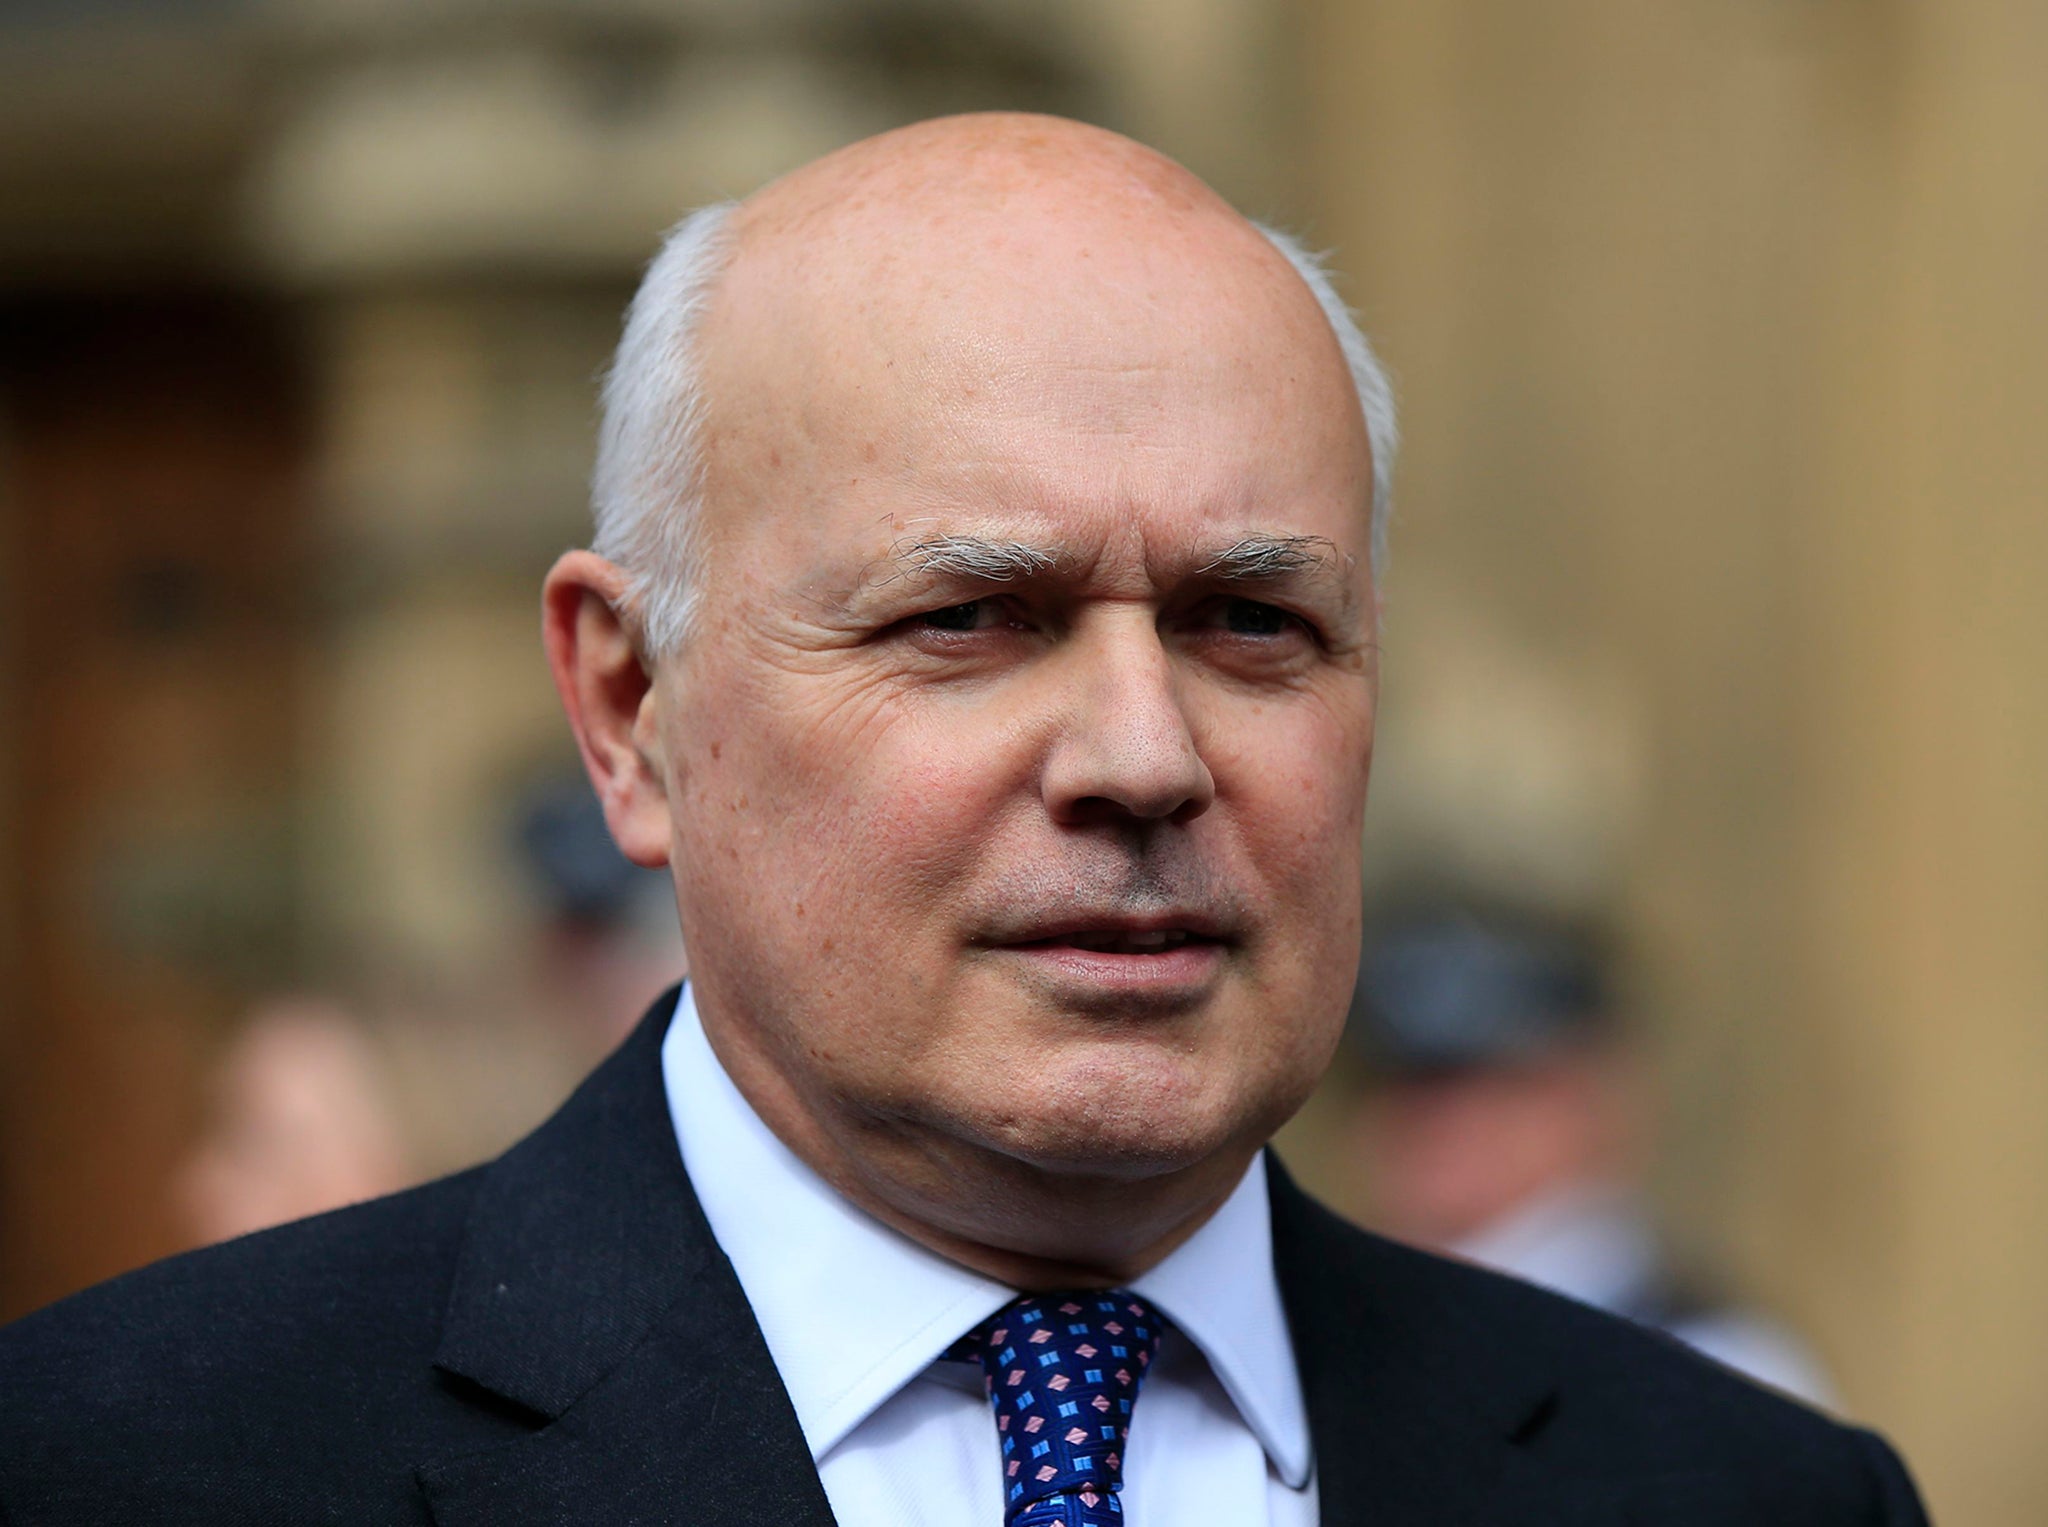 Universal Credit was one of Iain Duncan Smith's flagship policies during his tenure at DWP